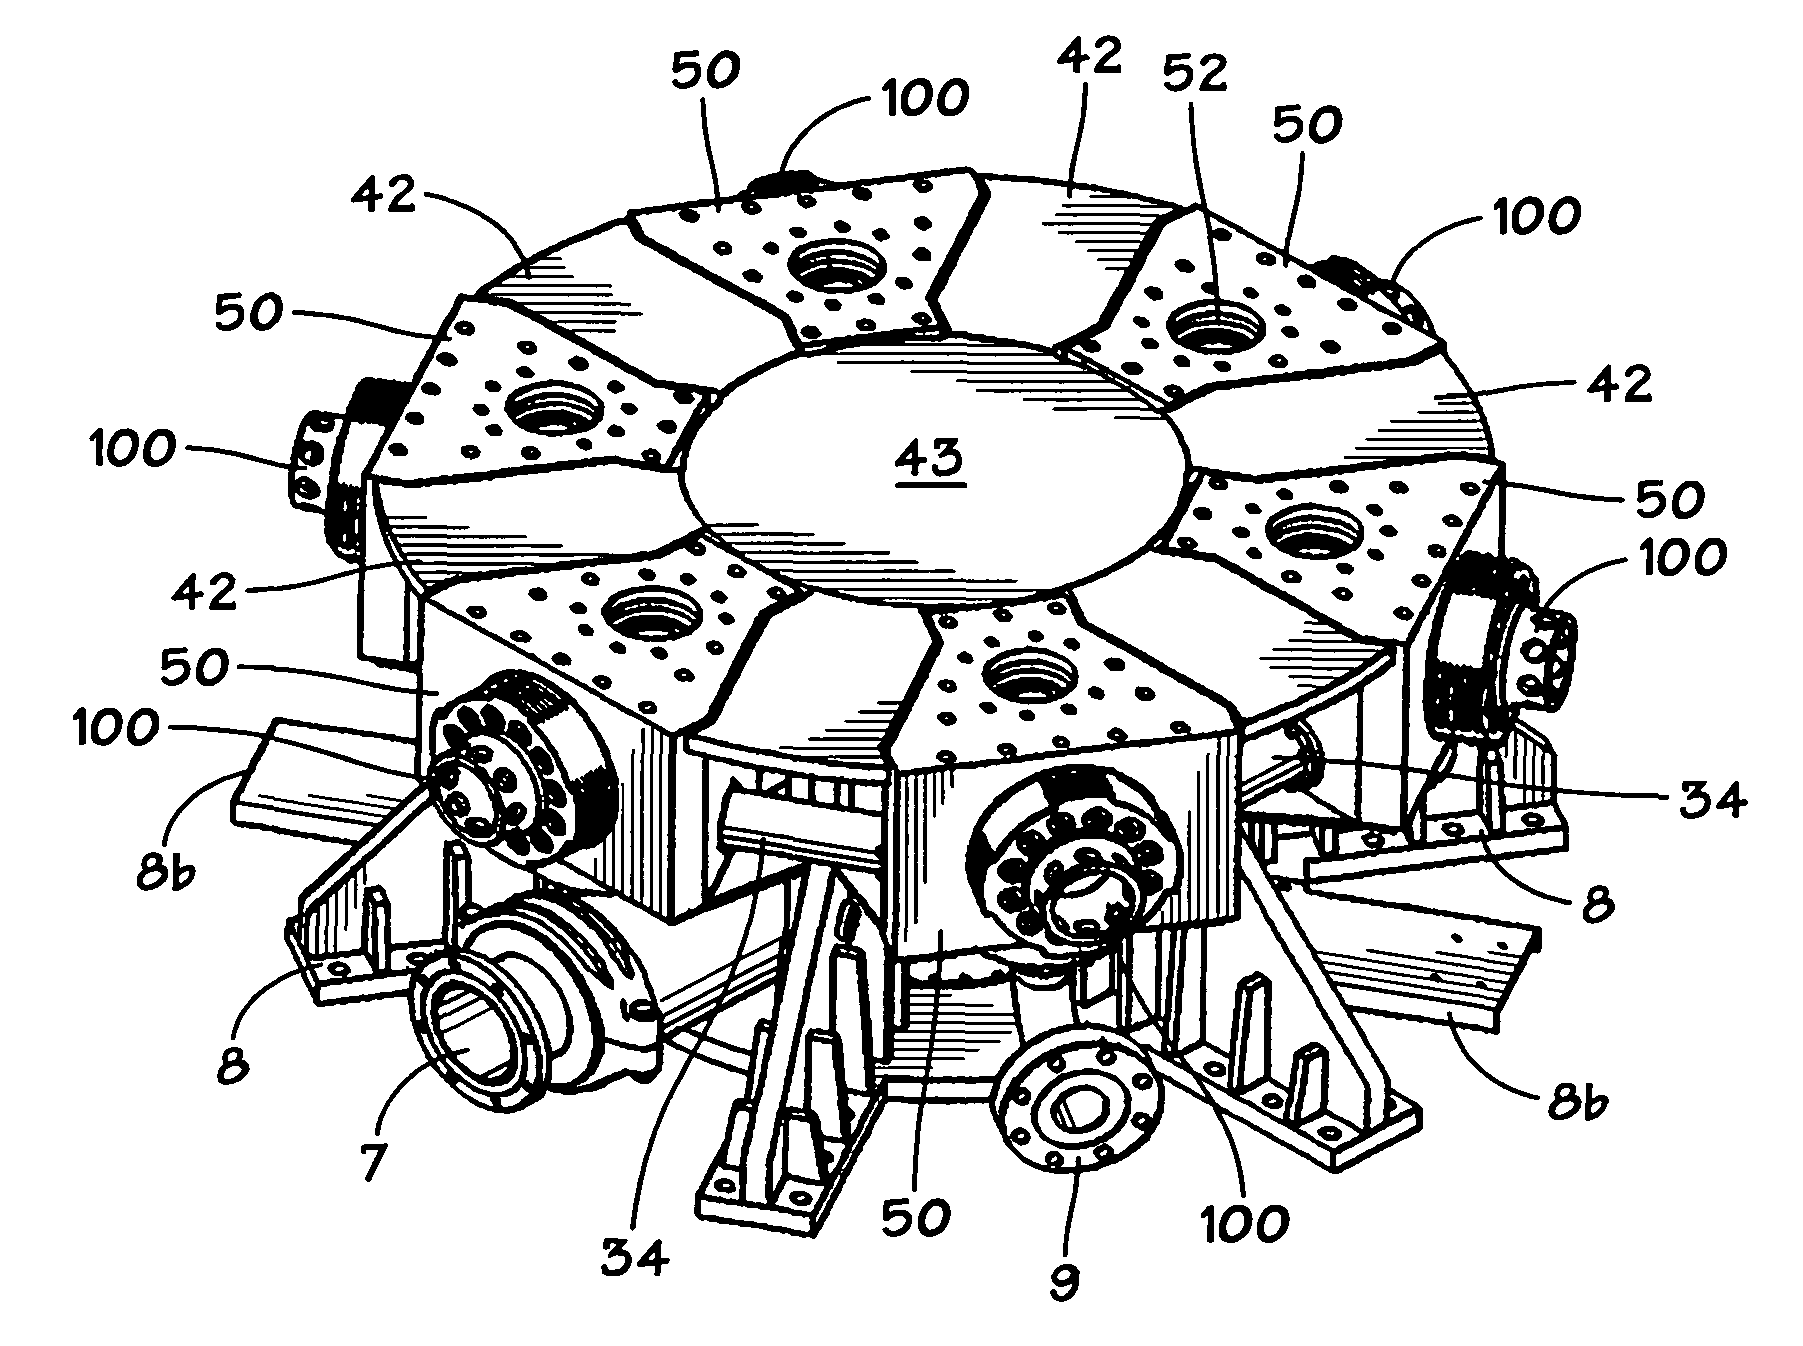 Drilling fluid pump systems and methods